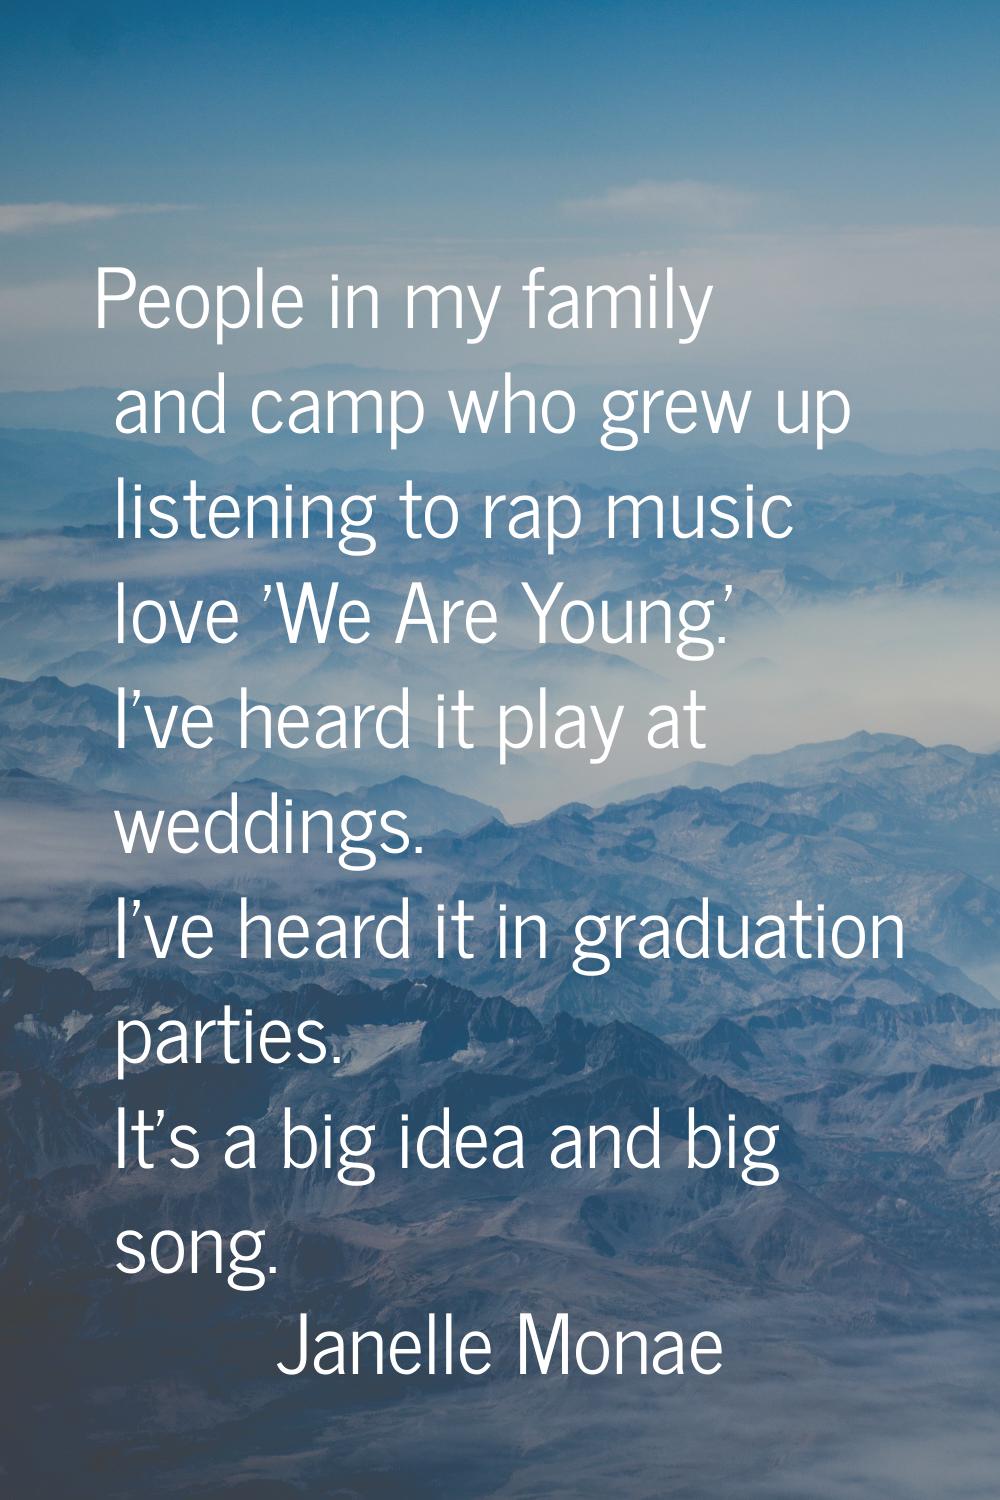 People in my family and camp who grew up listening to rap music love 'We Are Young.' I've heard it 